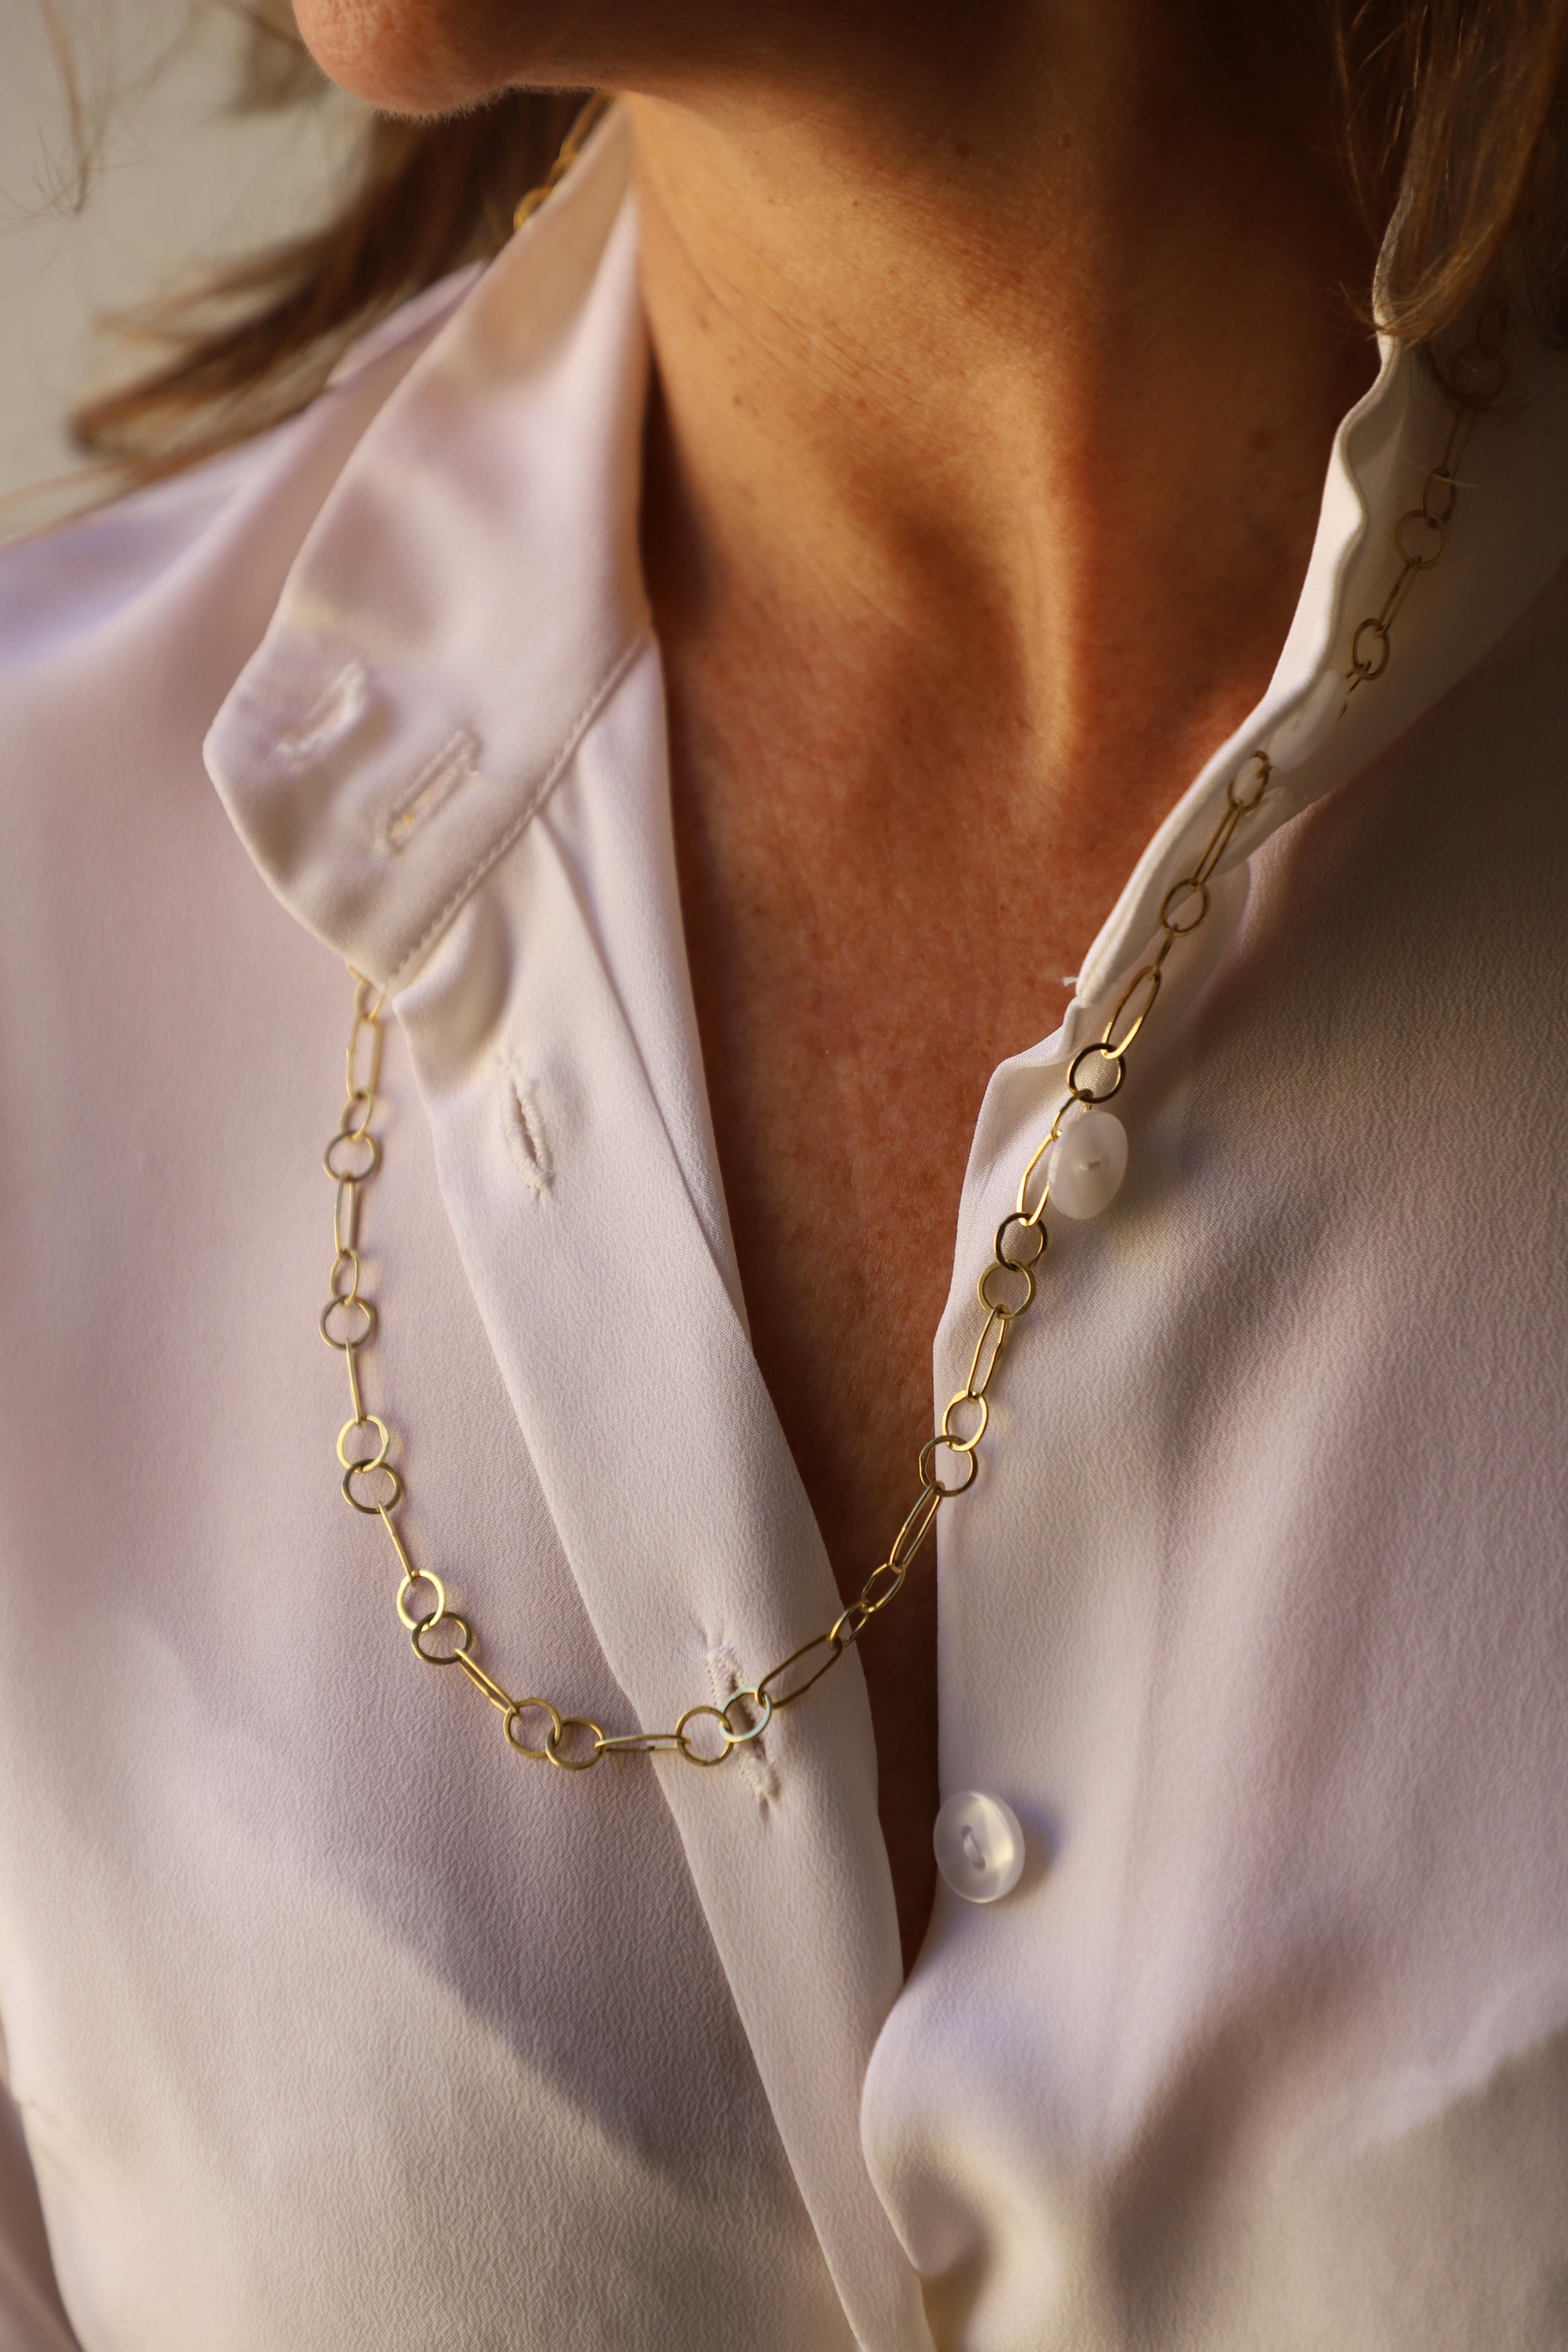 Rossella Ugolini Design Collection a Paperclip Links chain necklace hand made one by one , Slightly Hammered, in 18 Karat Yellow Gold 
A luminous unisex chain links necklace handcrafted in 18 karats yellow gold. Simple yet versatile, easy to match